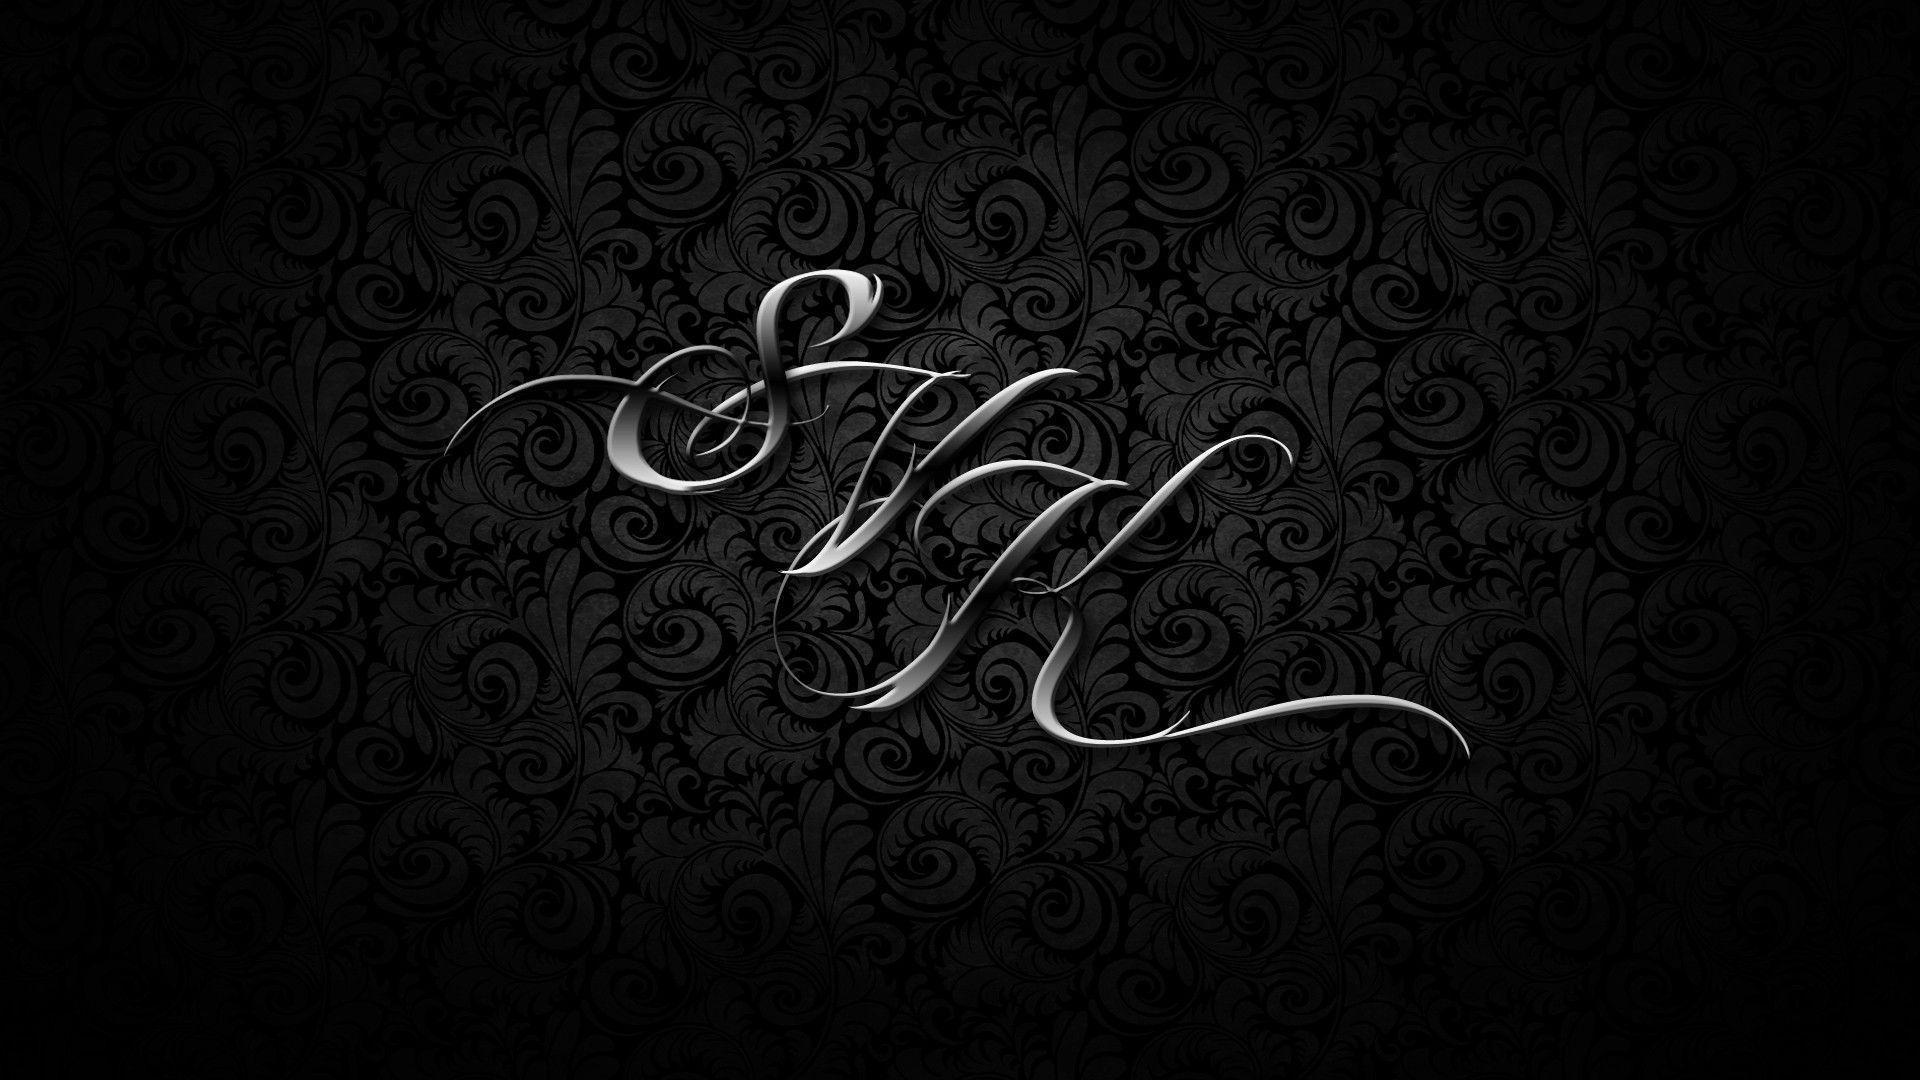 Trying out wallpaper with my Initials. Stefan Kamer: My Thoughts